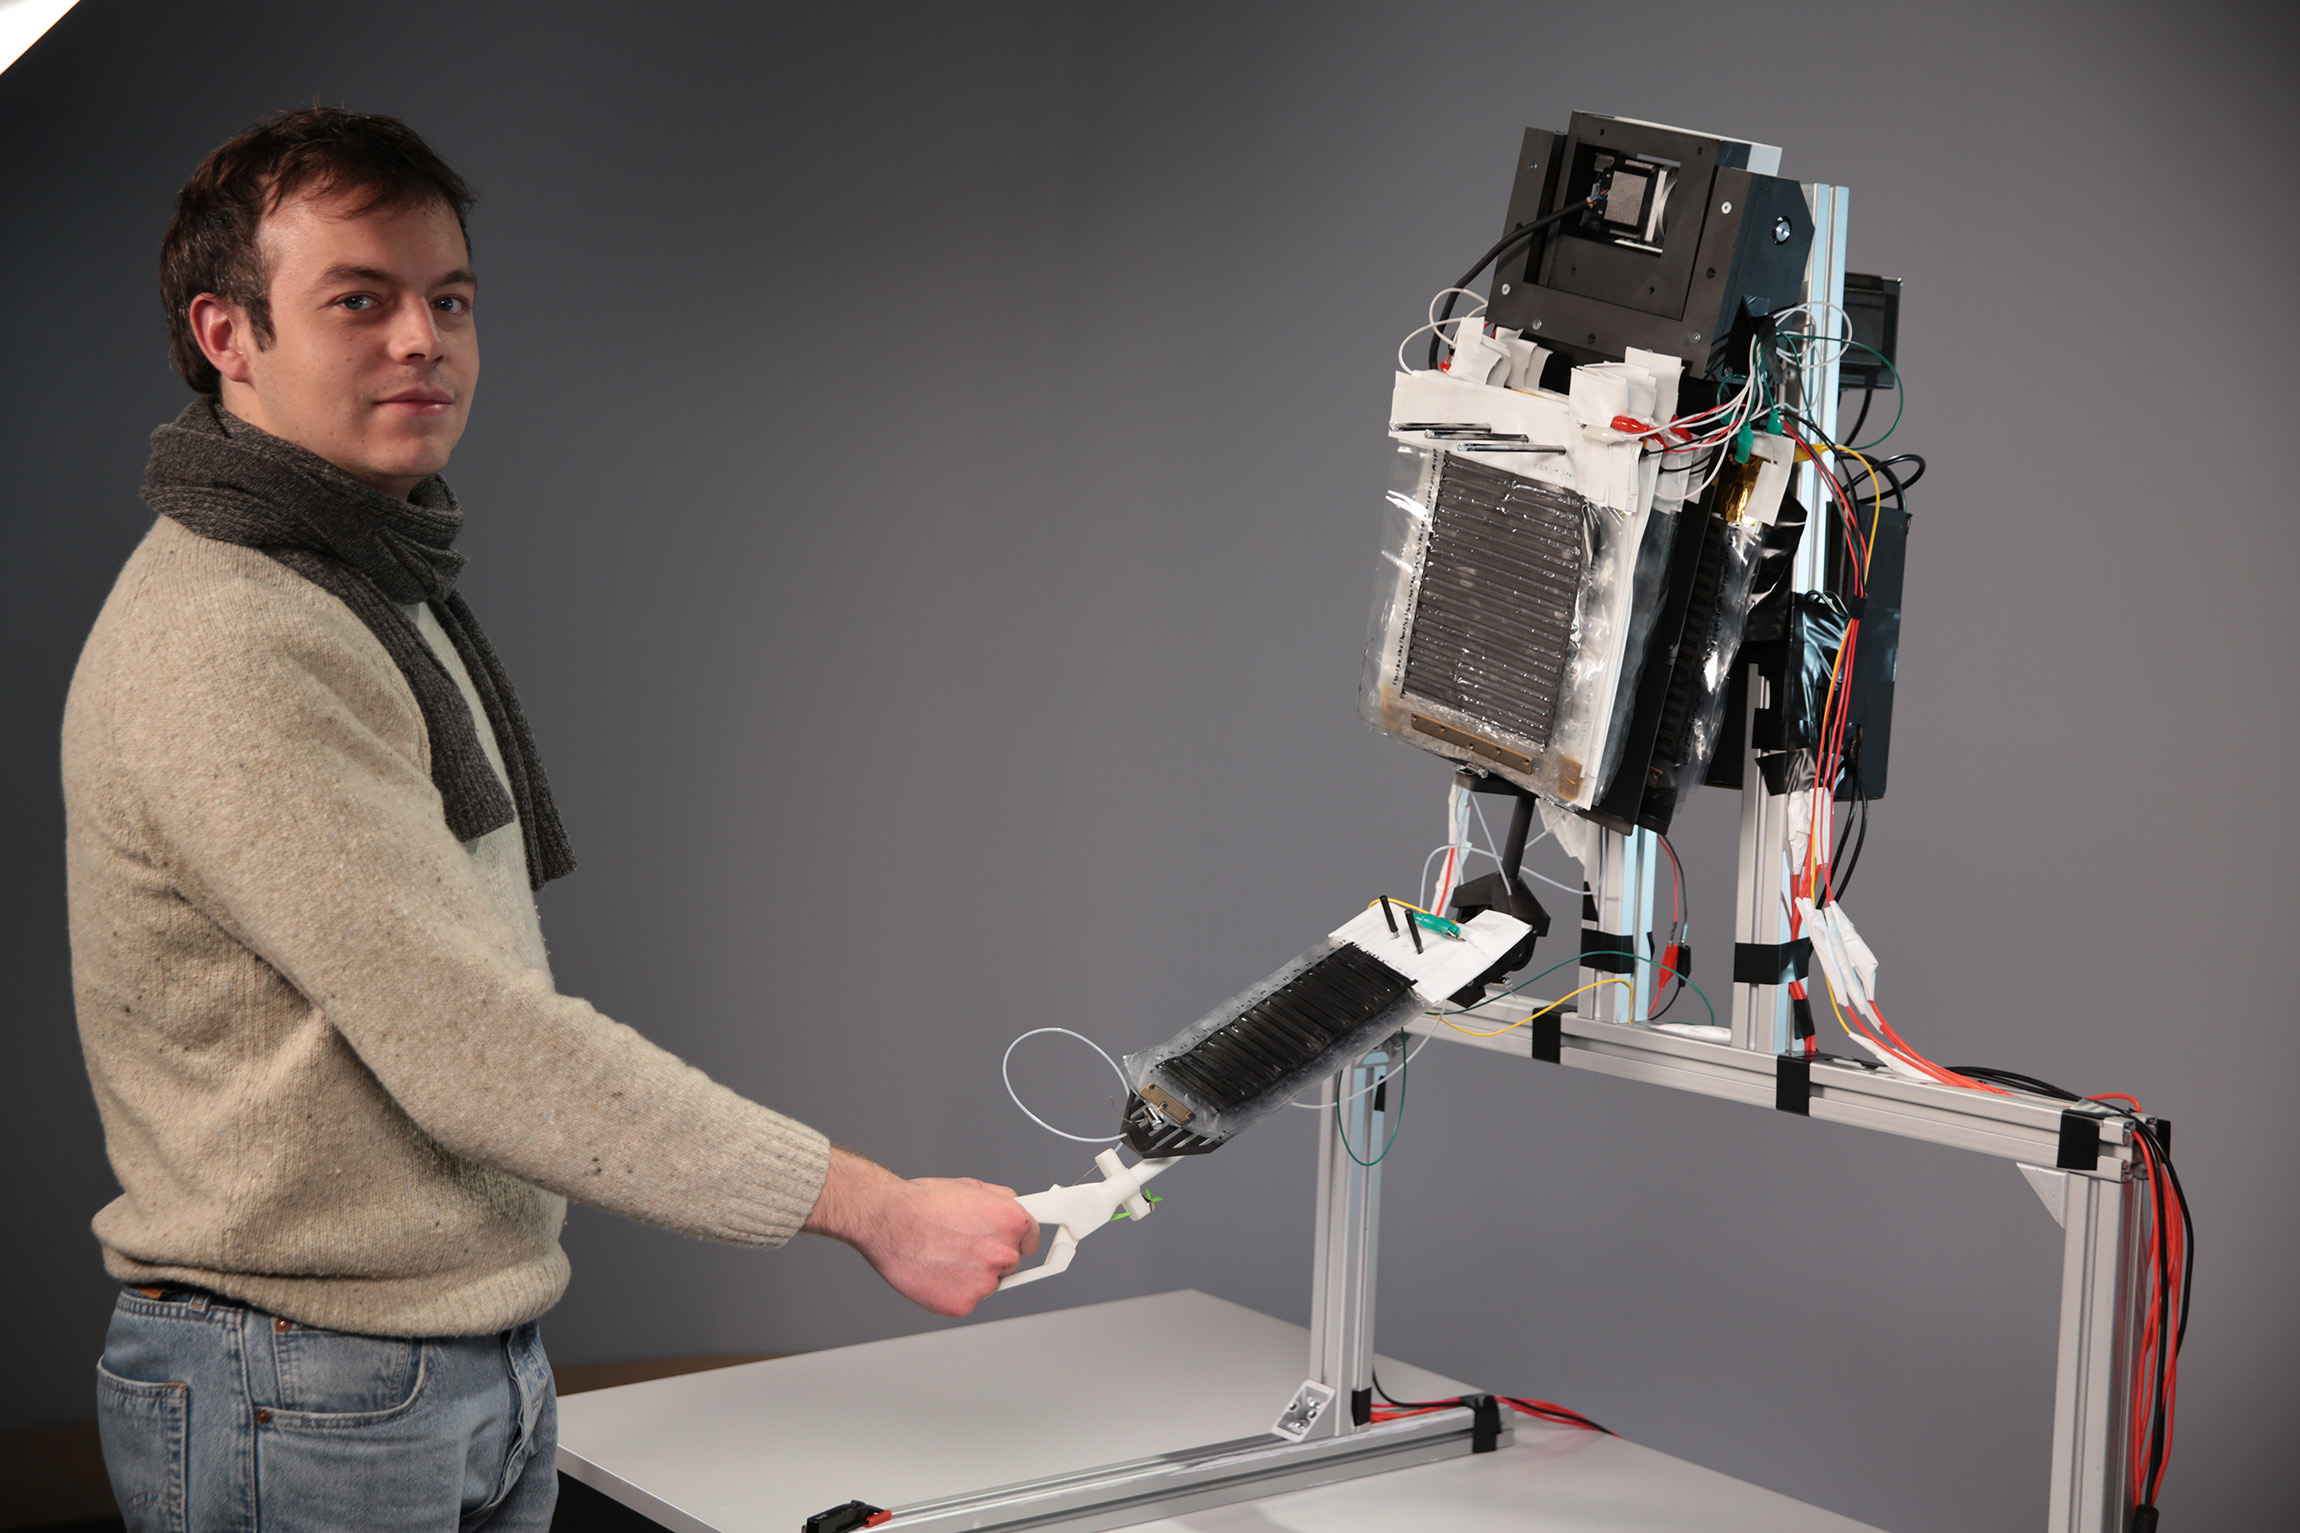 A student shakes hands with the robot arm